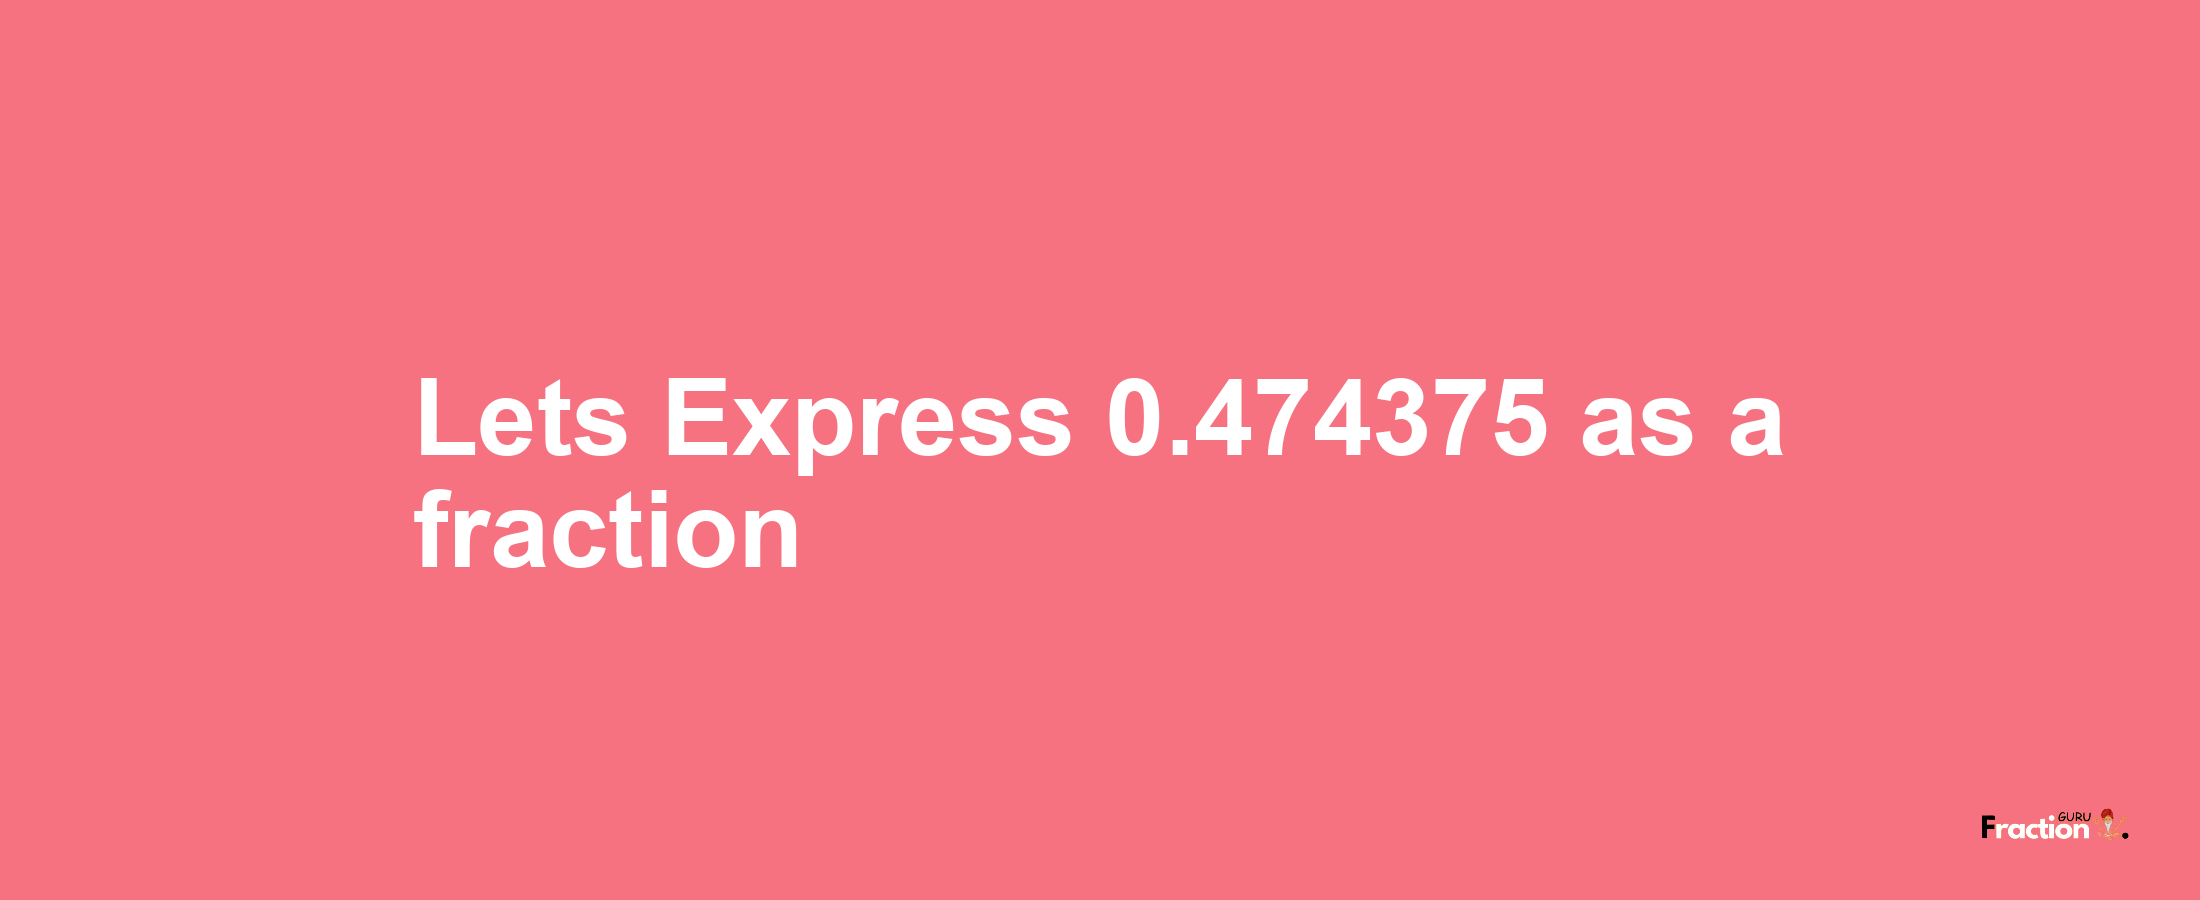 Lets Express 0.474375 as afraction